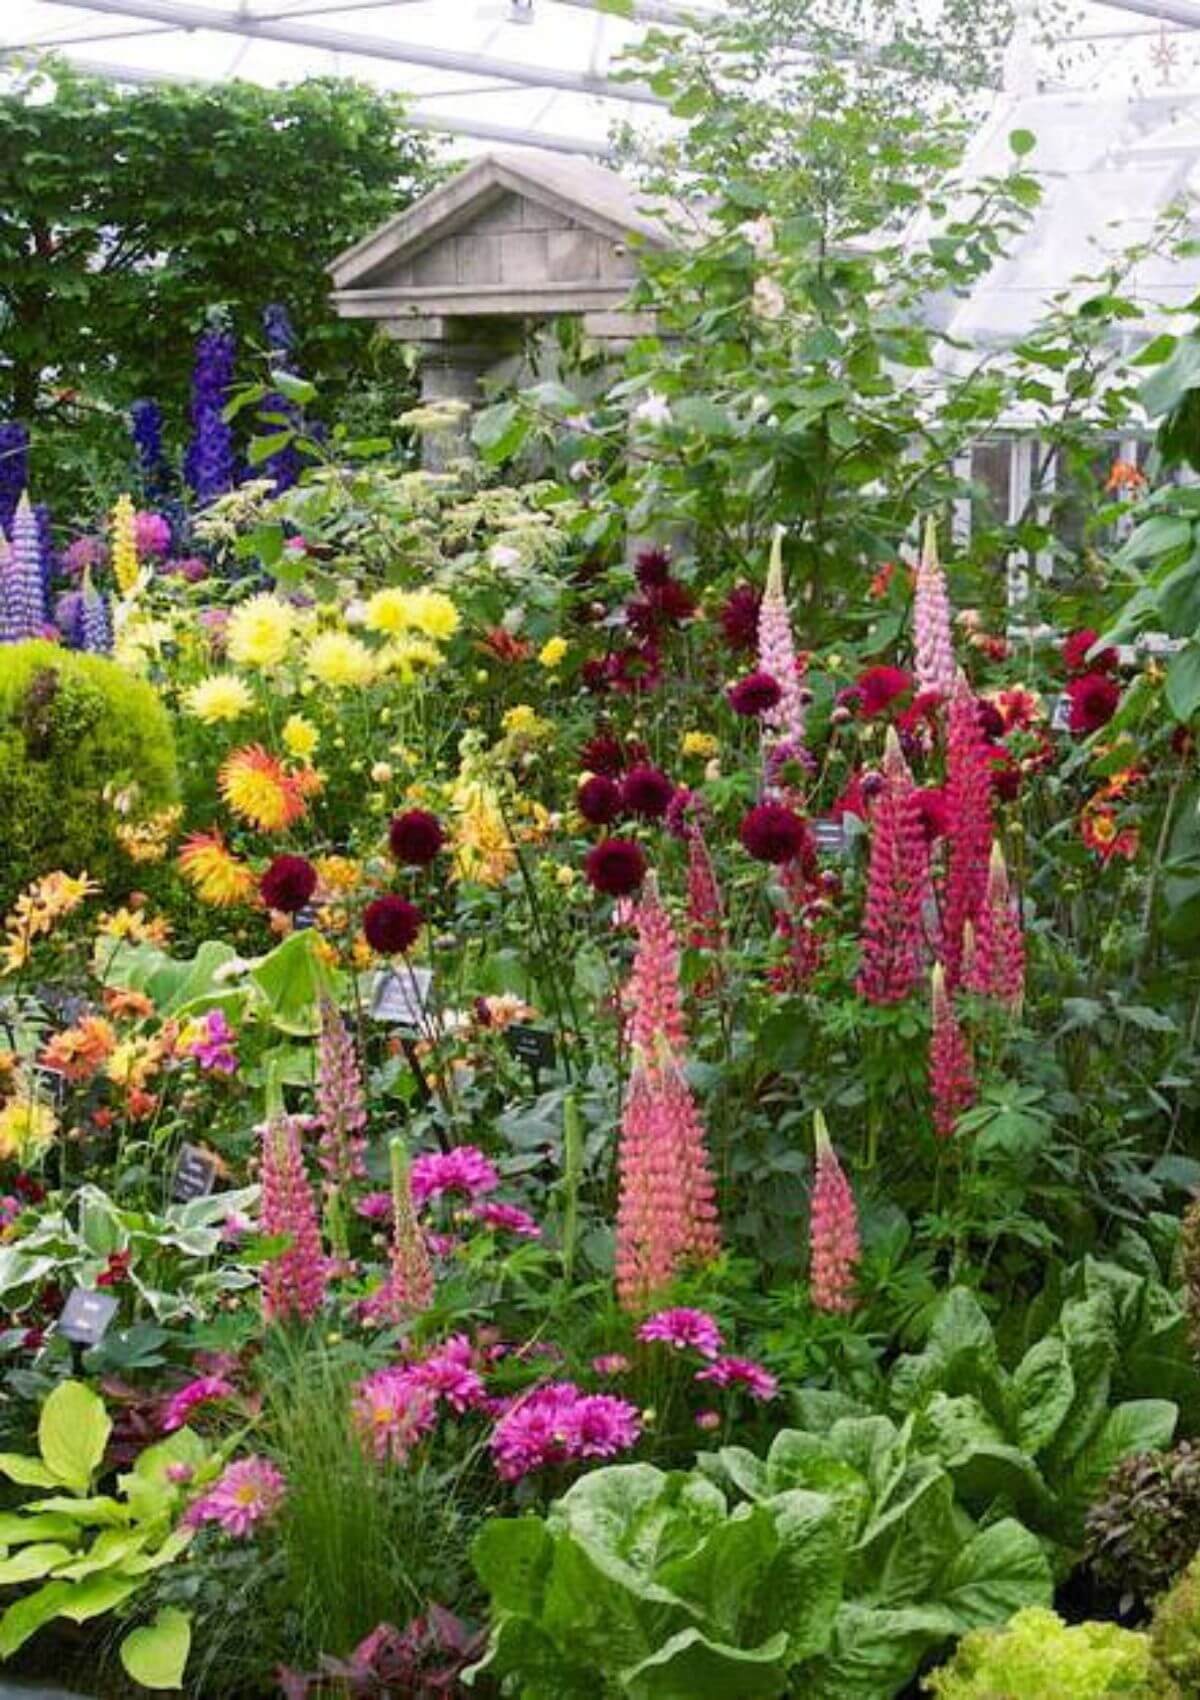 The Chelsea Flower Show makes for an amazing day out in May